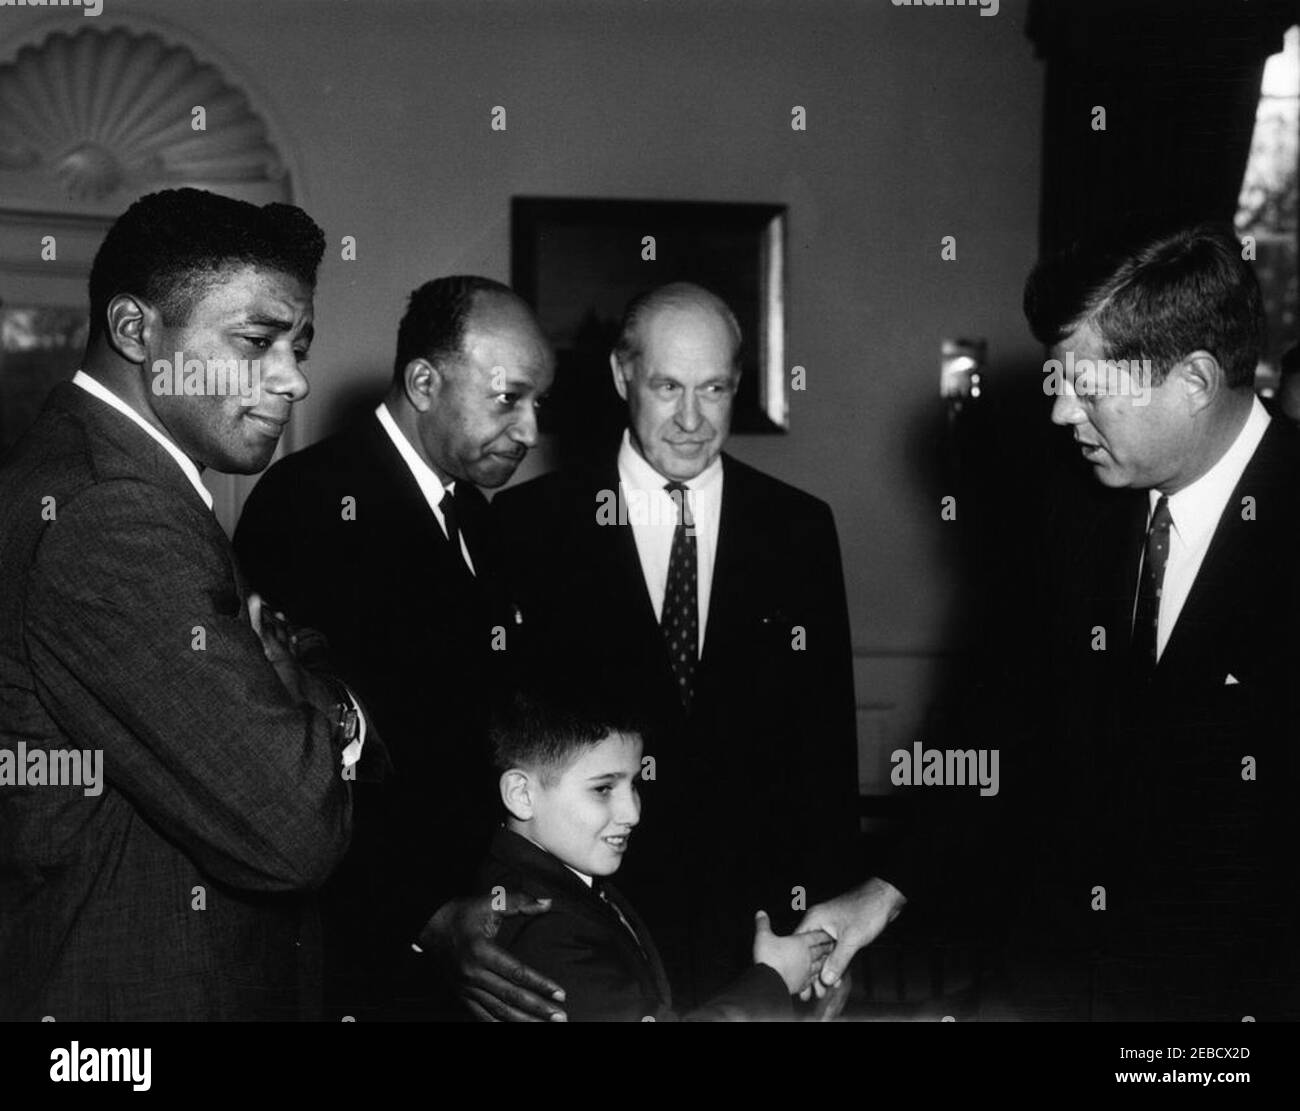 Visit of members of the Big Brothers Association, including Heavyweight Boxing Champion Floyd Patterson, 12:25PM. President John F. Kennedy greets representatives of the Big Brothers Association in connection with Big Brothers Week. The President shakes hands with ten-year-old Freddie Cicala, a u201clittle brotheru201d member of the Big Brothers organization. Looking on are (L-R): World heavyweight boxing champion Floyd Patterson; John Duncan, member of the District of Columbia Board of Commissioners; and journalist Drew Pearson. Oval Office, White House, Washington, D.C. Stock Photo